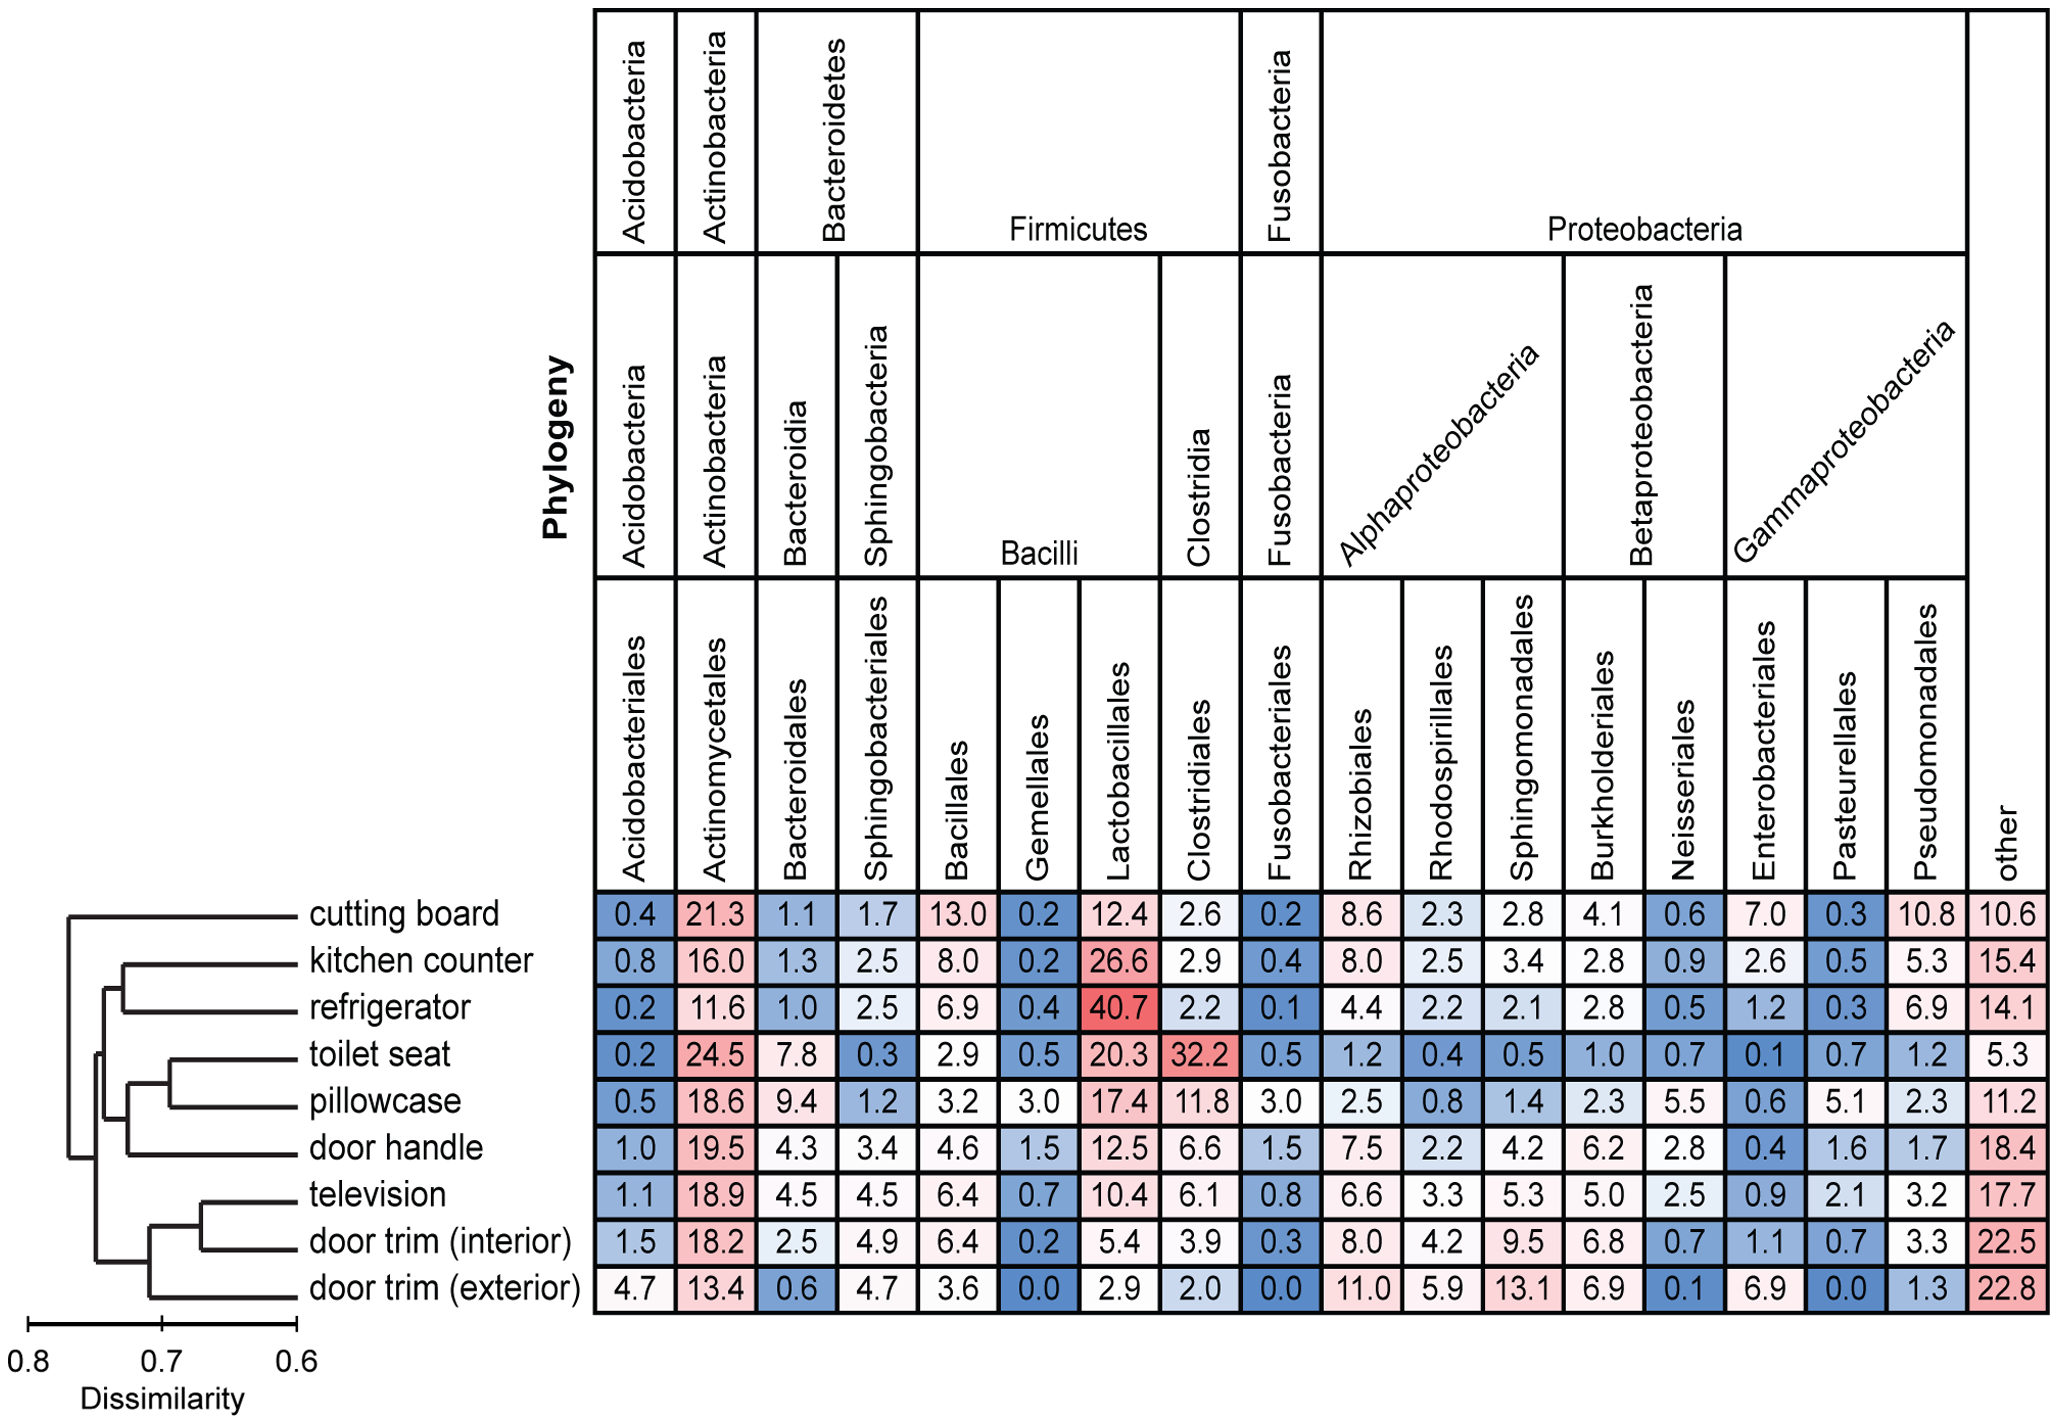 Heat map of the mean relative abundances of dominant bacterial taxa across the nine sampled locations. show more Each column is colored so that taxa with high relative abundances are red, intermediate relative abundances are white, and low abundances are blue. The dendrogram on the left summarizes the overall degree of dissimilarity (calculated from unweighted UniFrac values) of the bacterial communities in each of the sampled locations relative to each other. The dendrogram was created using mean UniFrac values for each of the sampled locations. doi:10.1371/journal.pone.0064133.g003